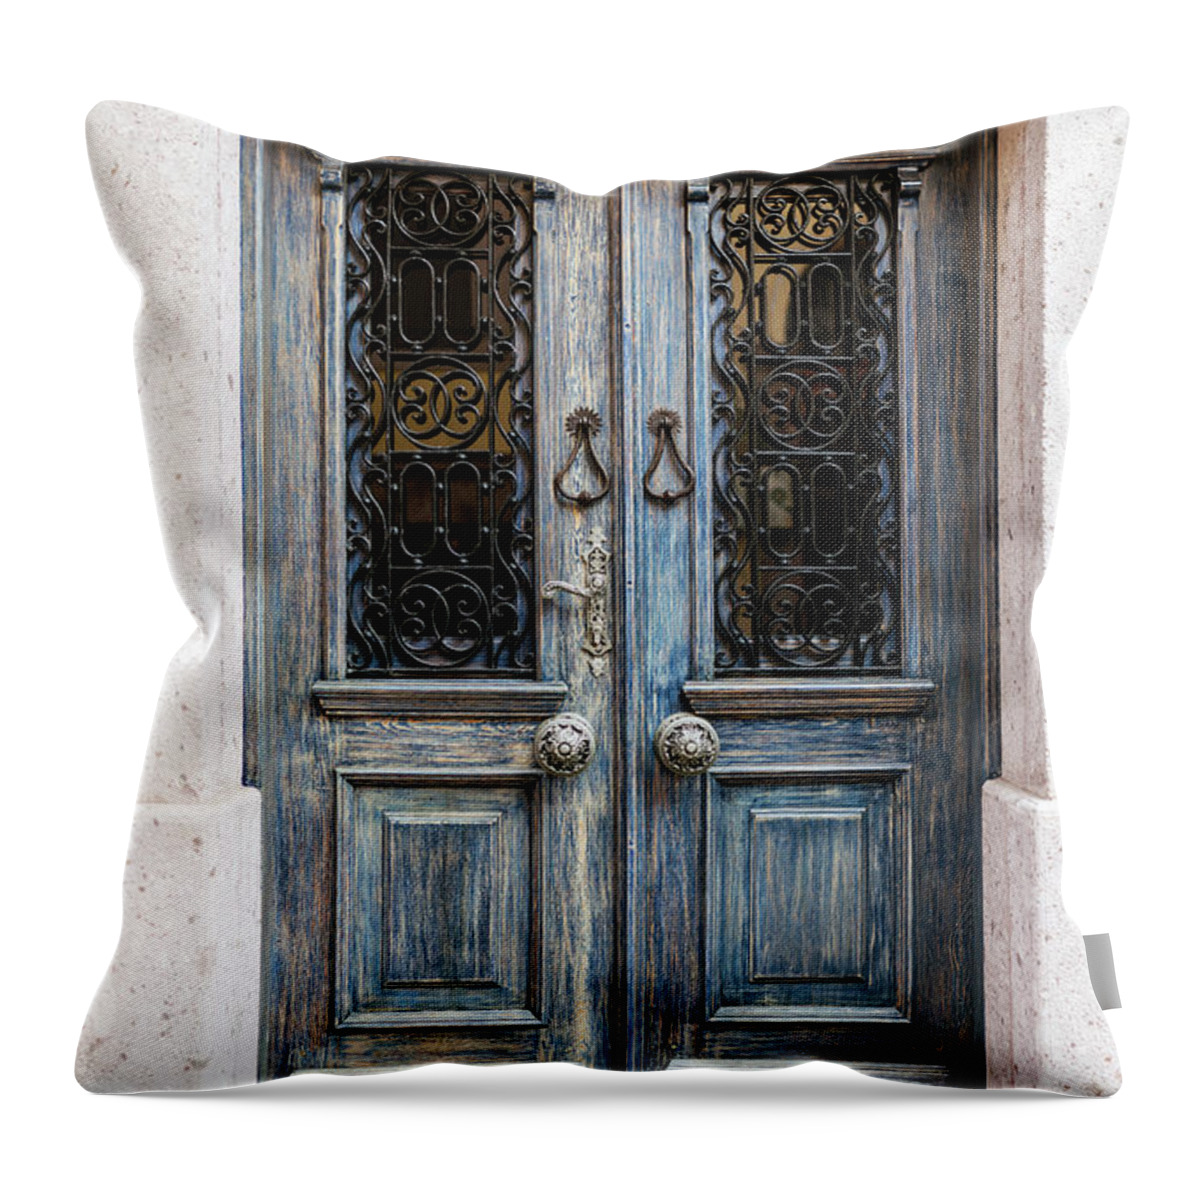 Handle Throw Pillow featuring the photograph Classic Style Door by 123ducu